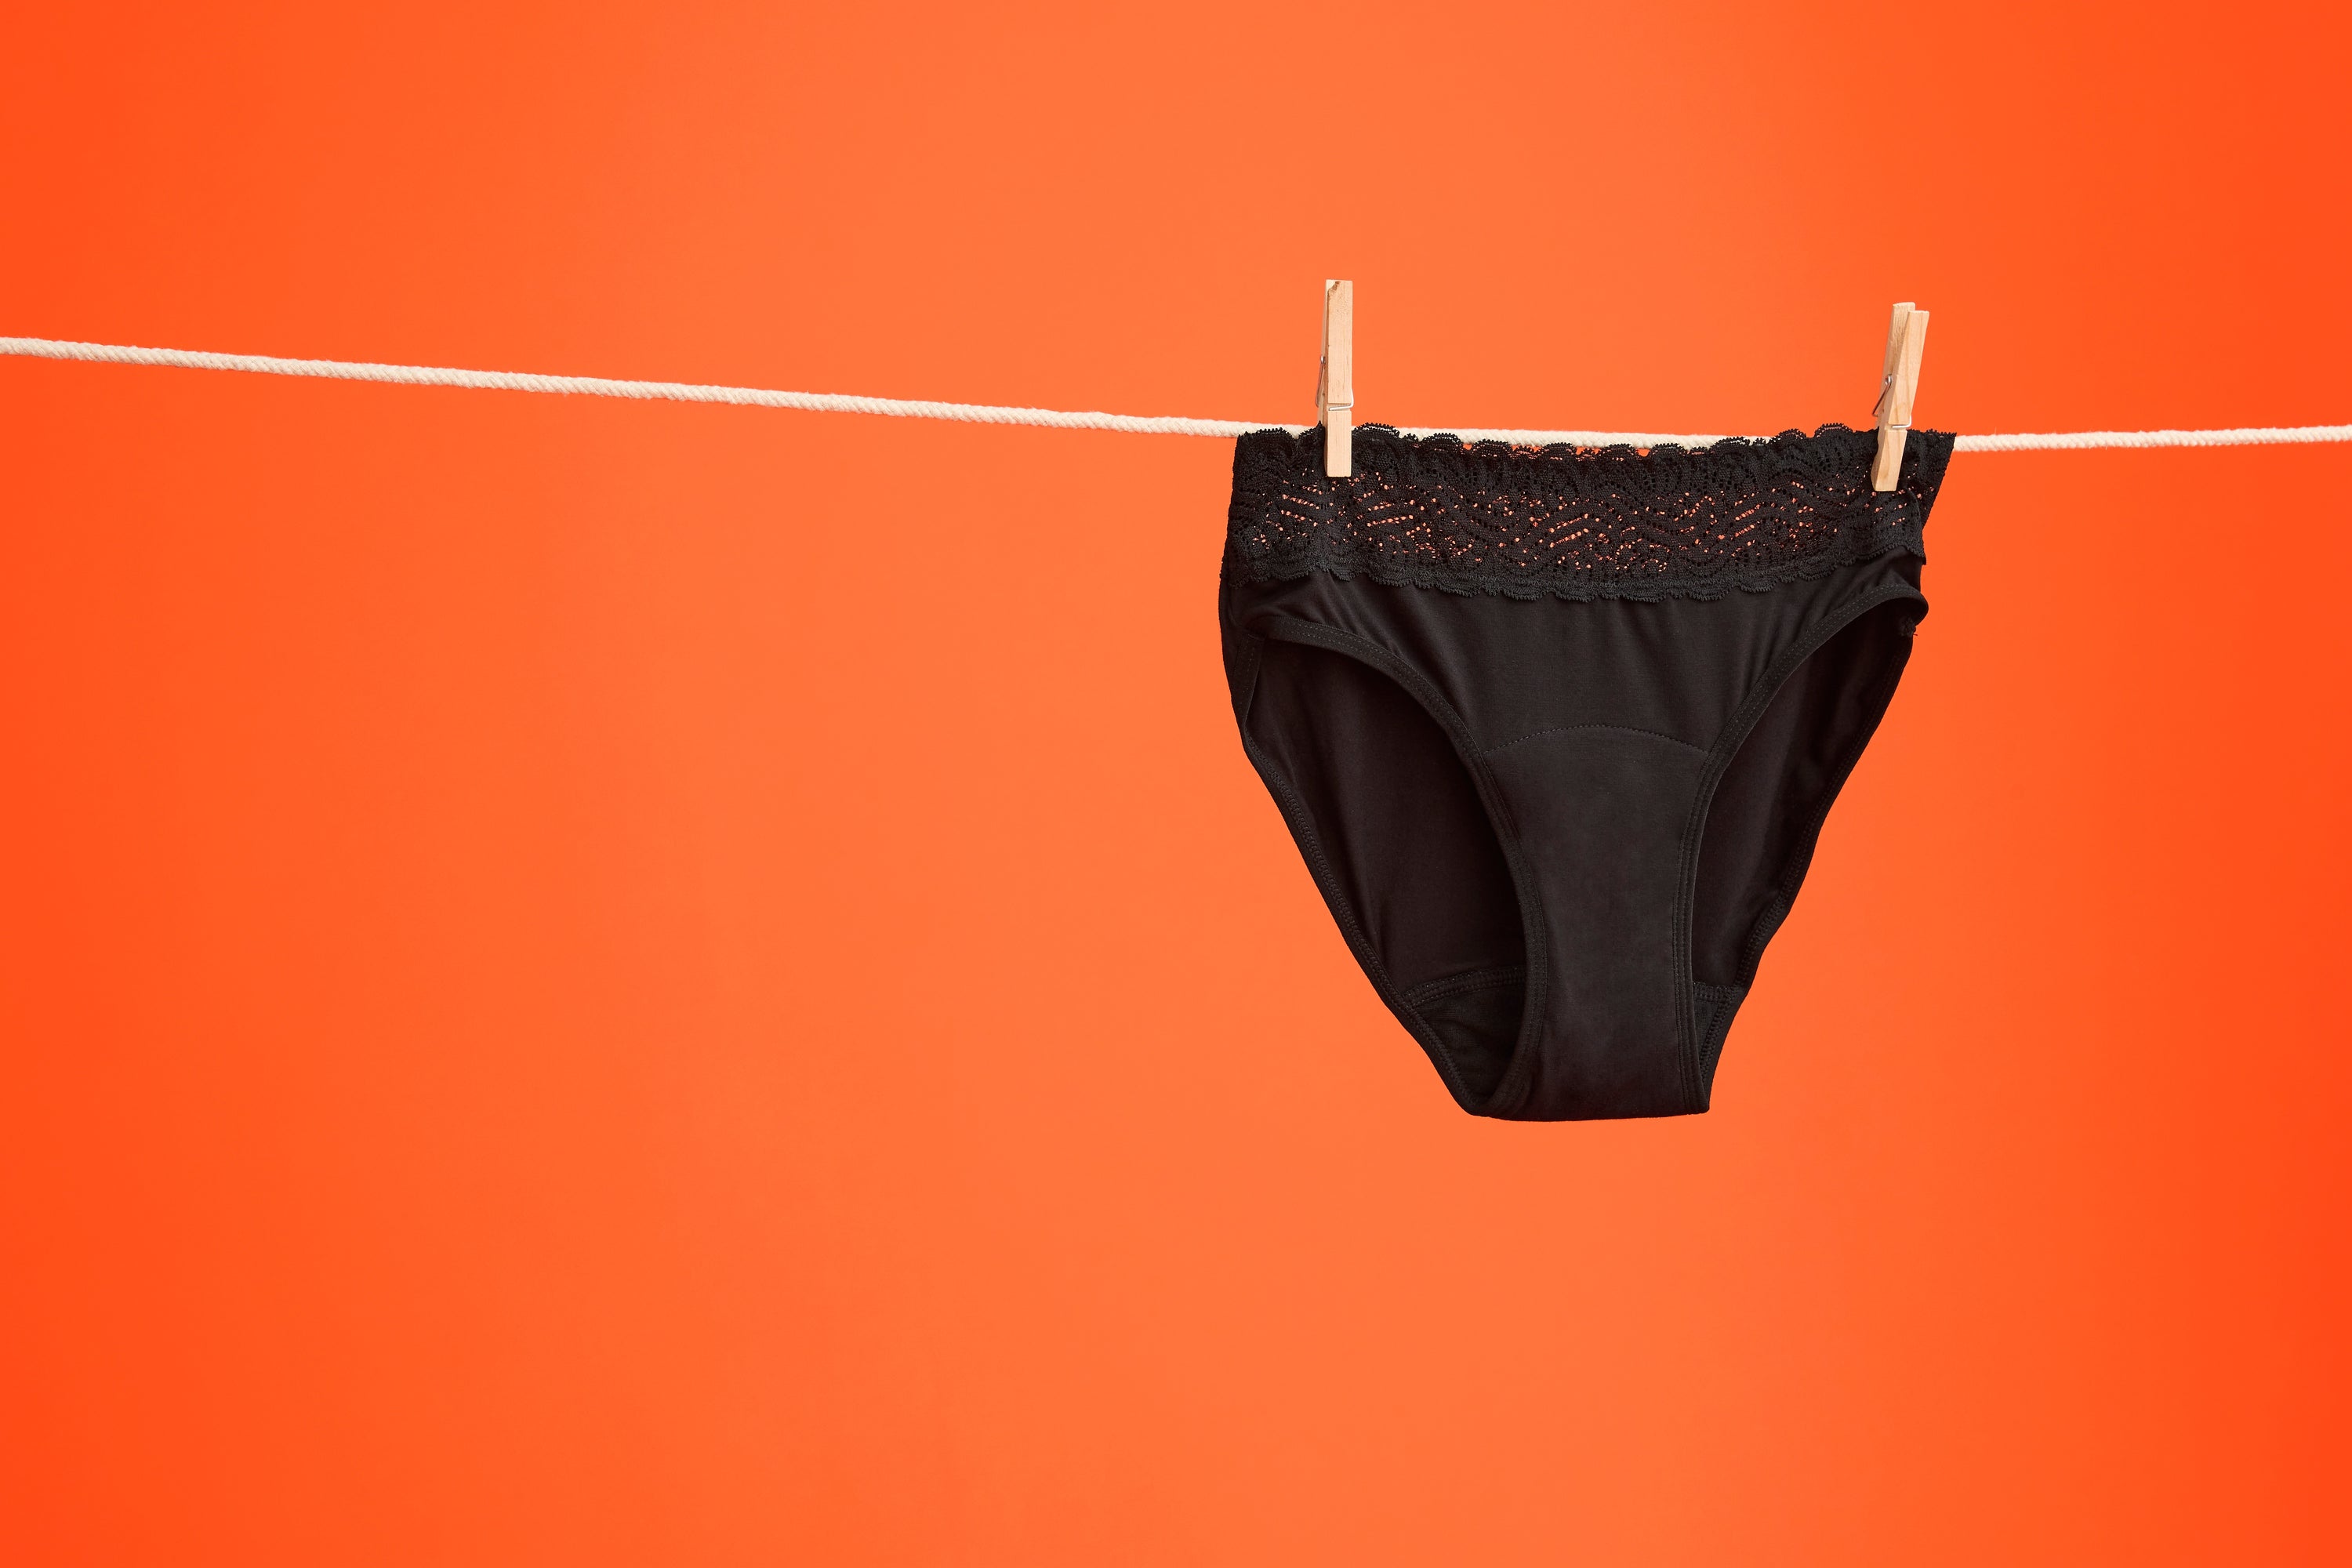 Modibodi - Should I wash my underwear before I use them? Absolutely, this  is very important! Not only for hygienic purposes (we all need to wash  newly bought undies before use!) but